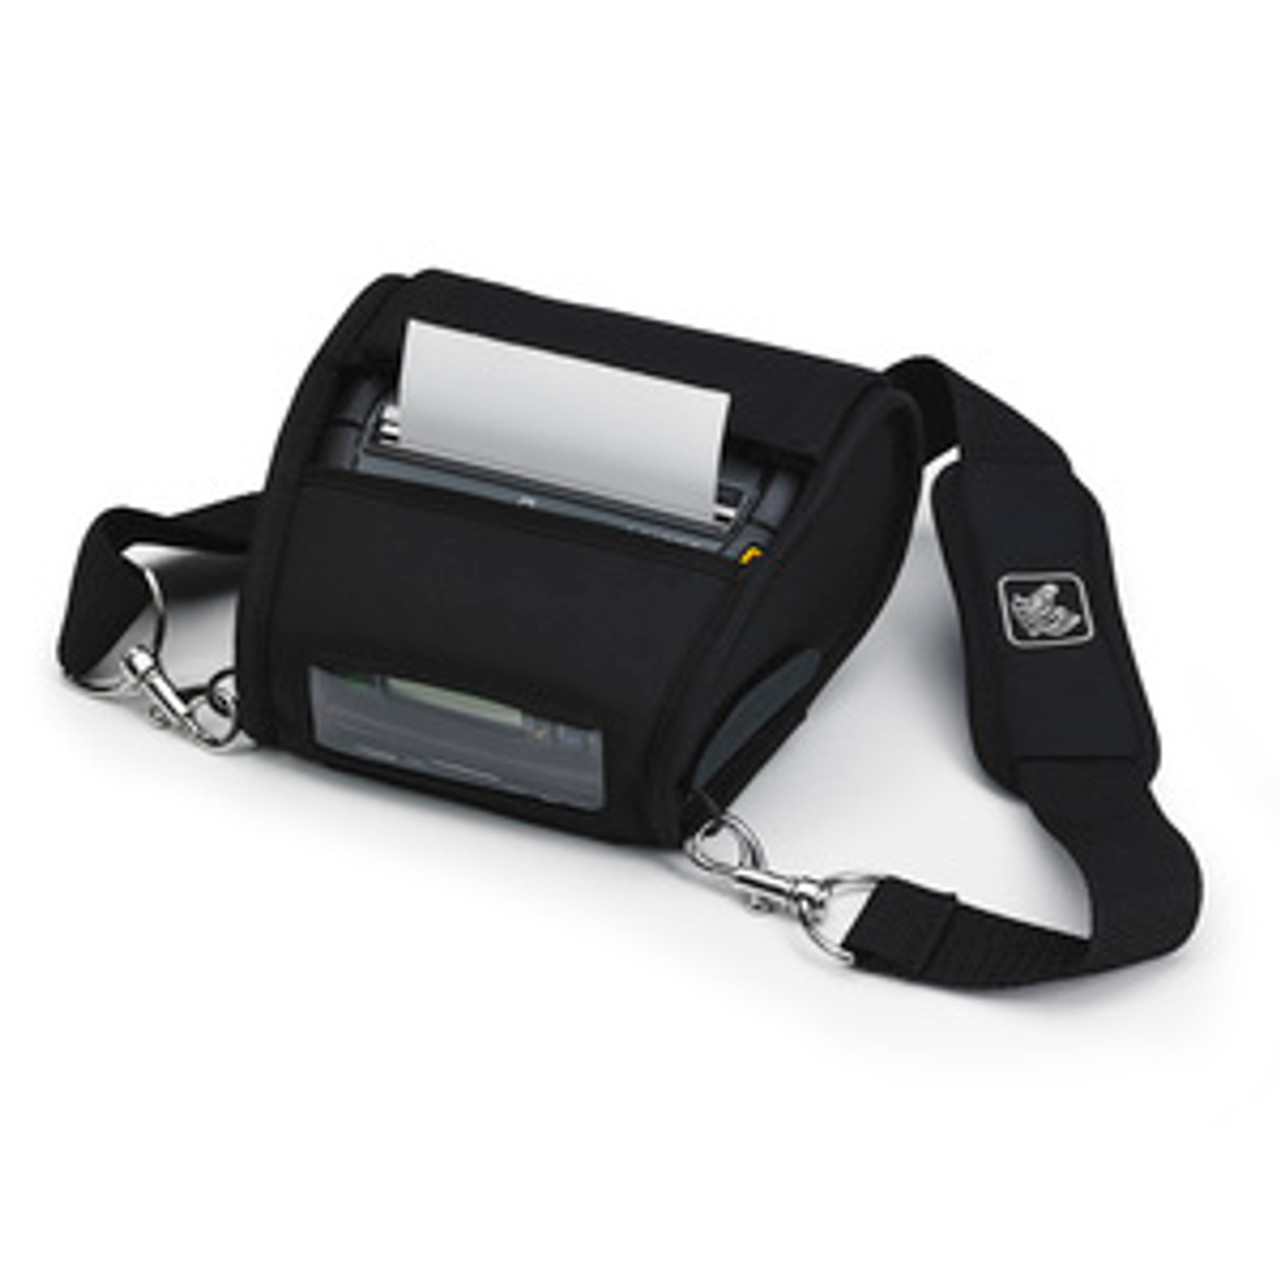 Zebra Durability Enhancing Case With Shouldler Strap For Zq520zq521 Printers 0121